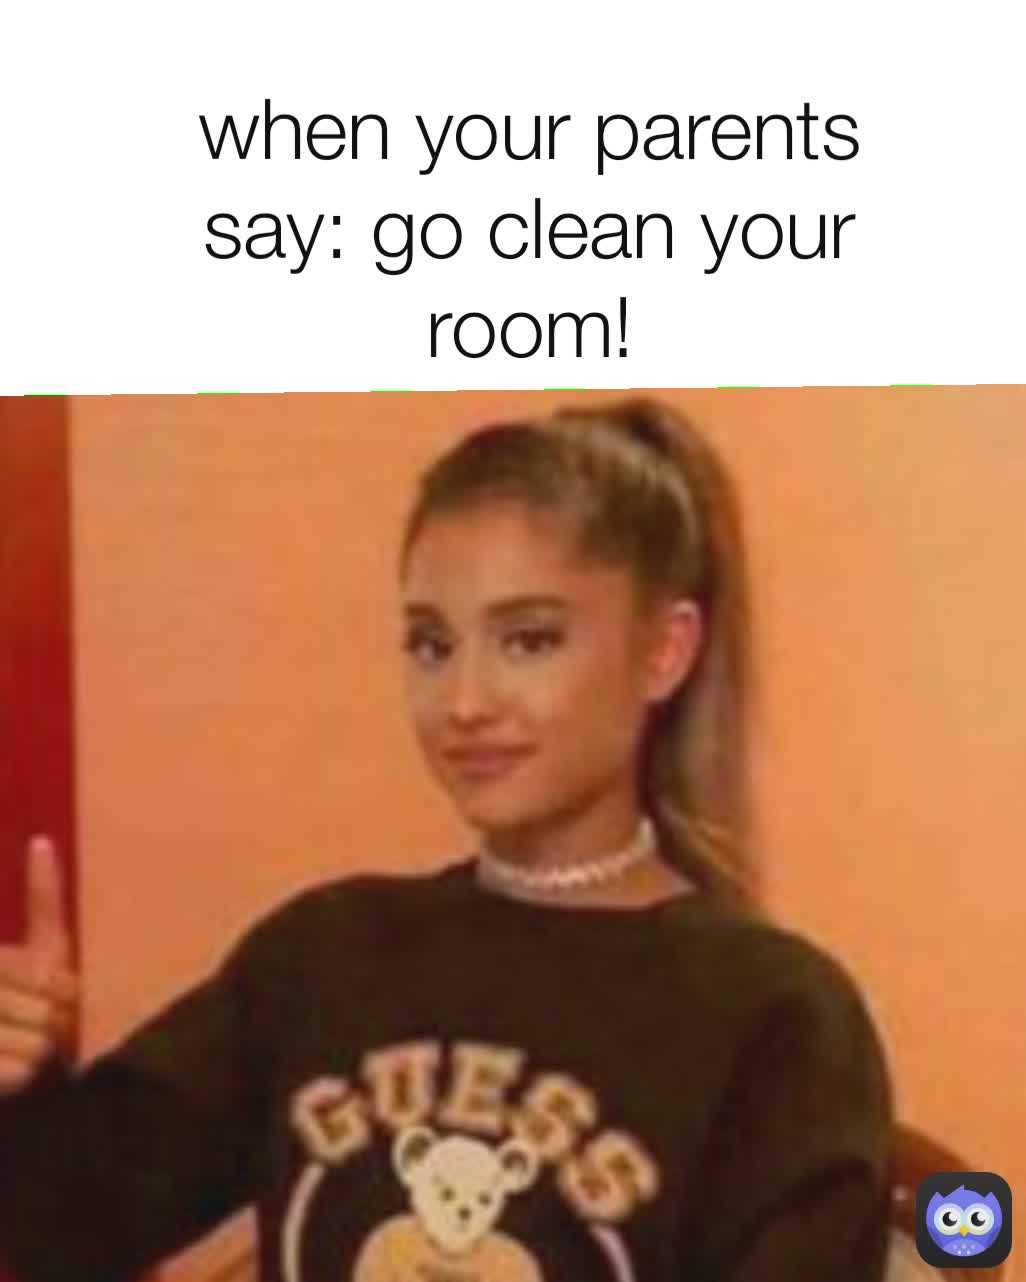 @arianas.favv when your parents say: go clean your room!